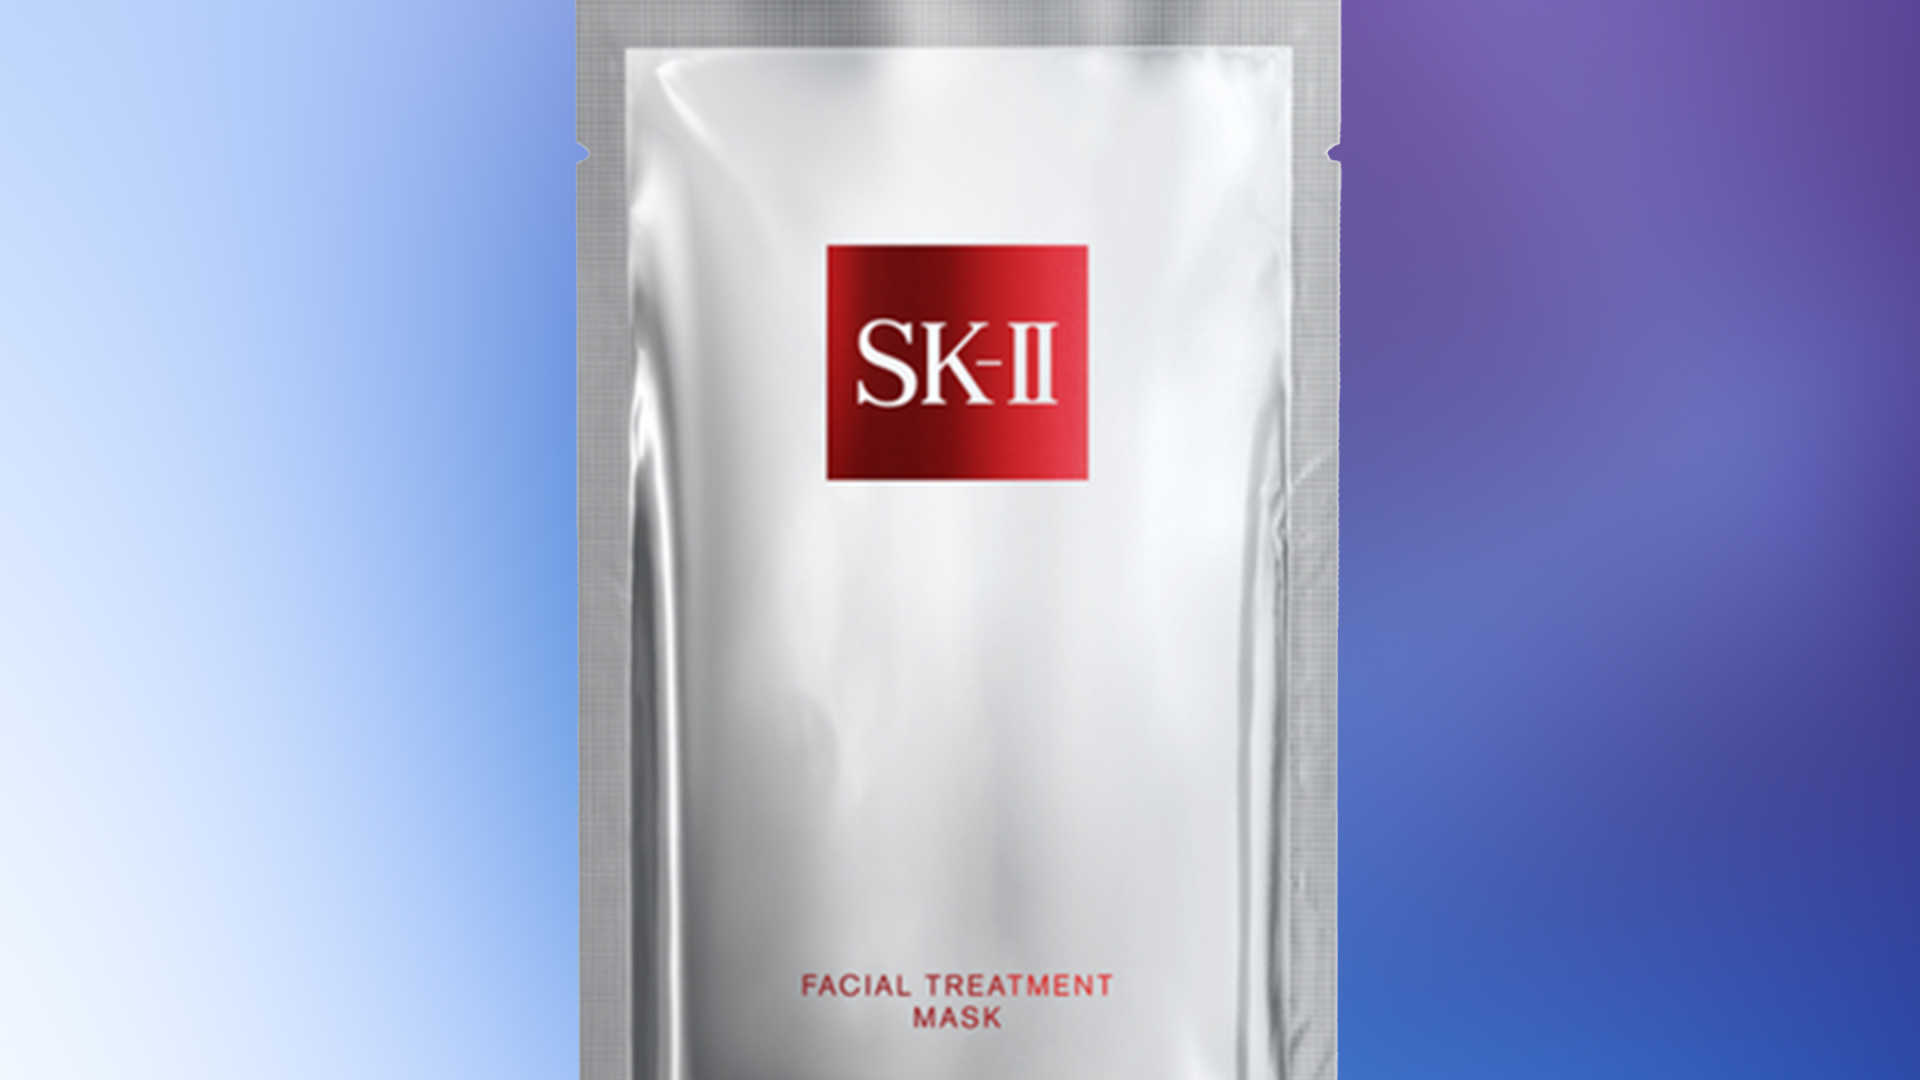 Product Of The Week: SK-II Facial Treatment Mask